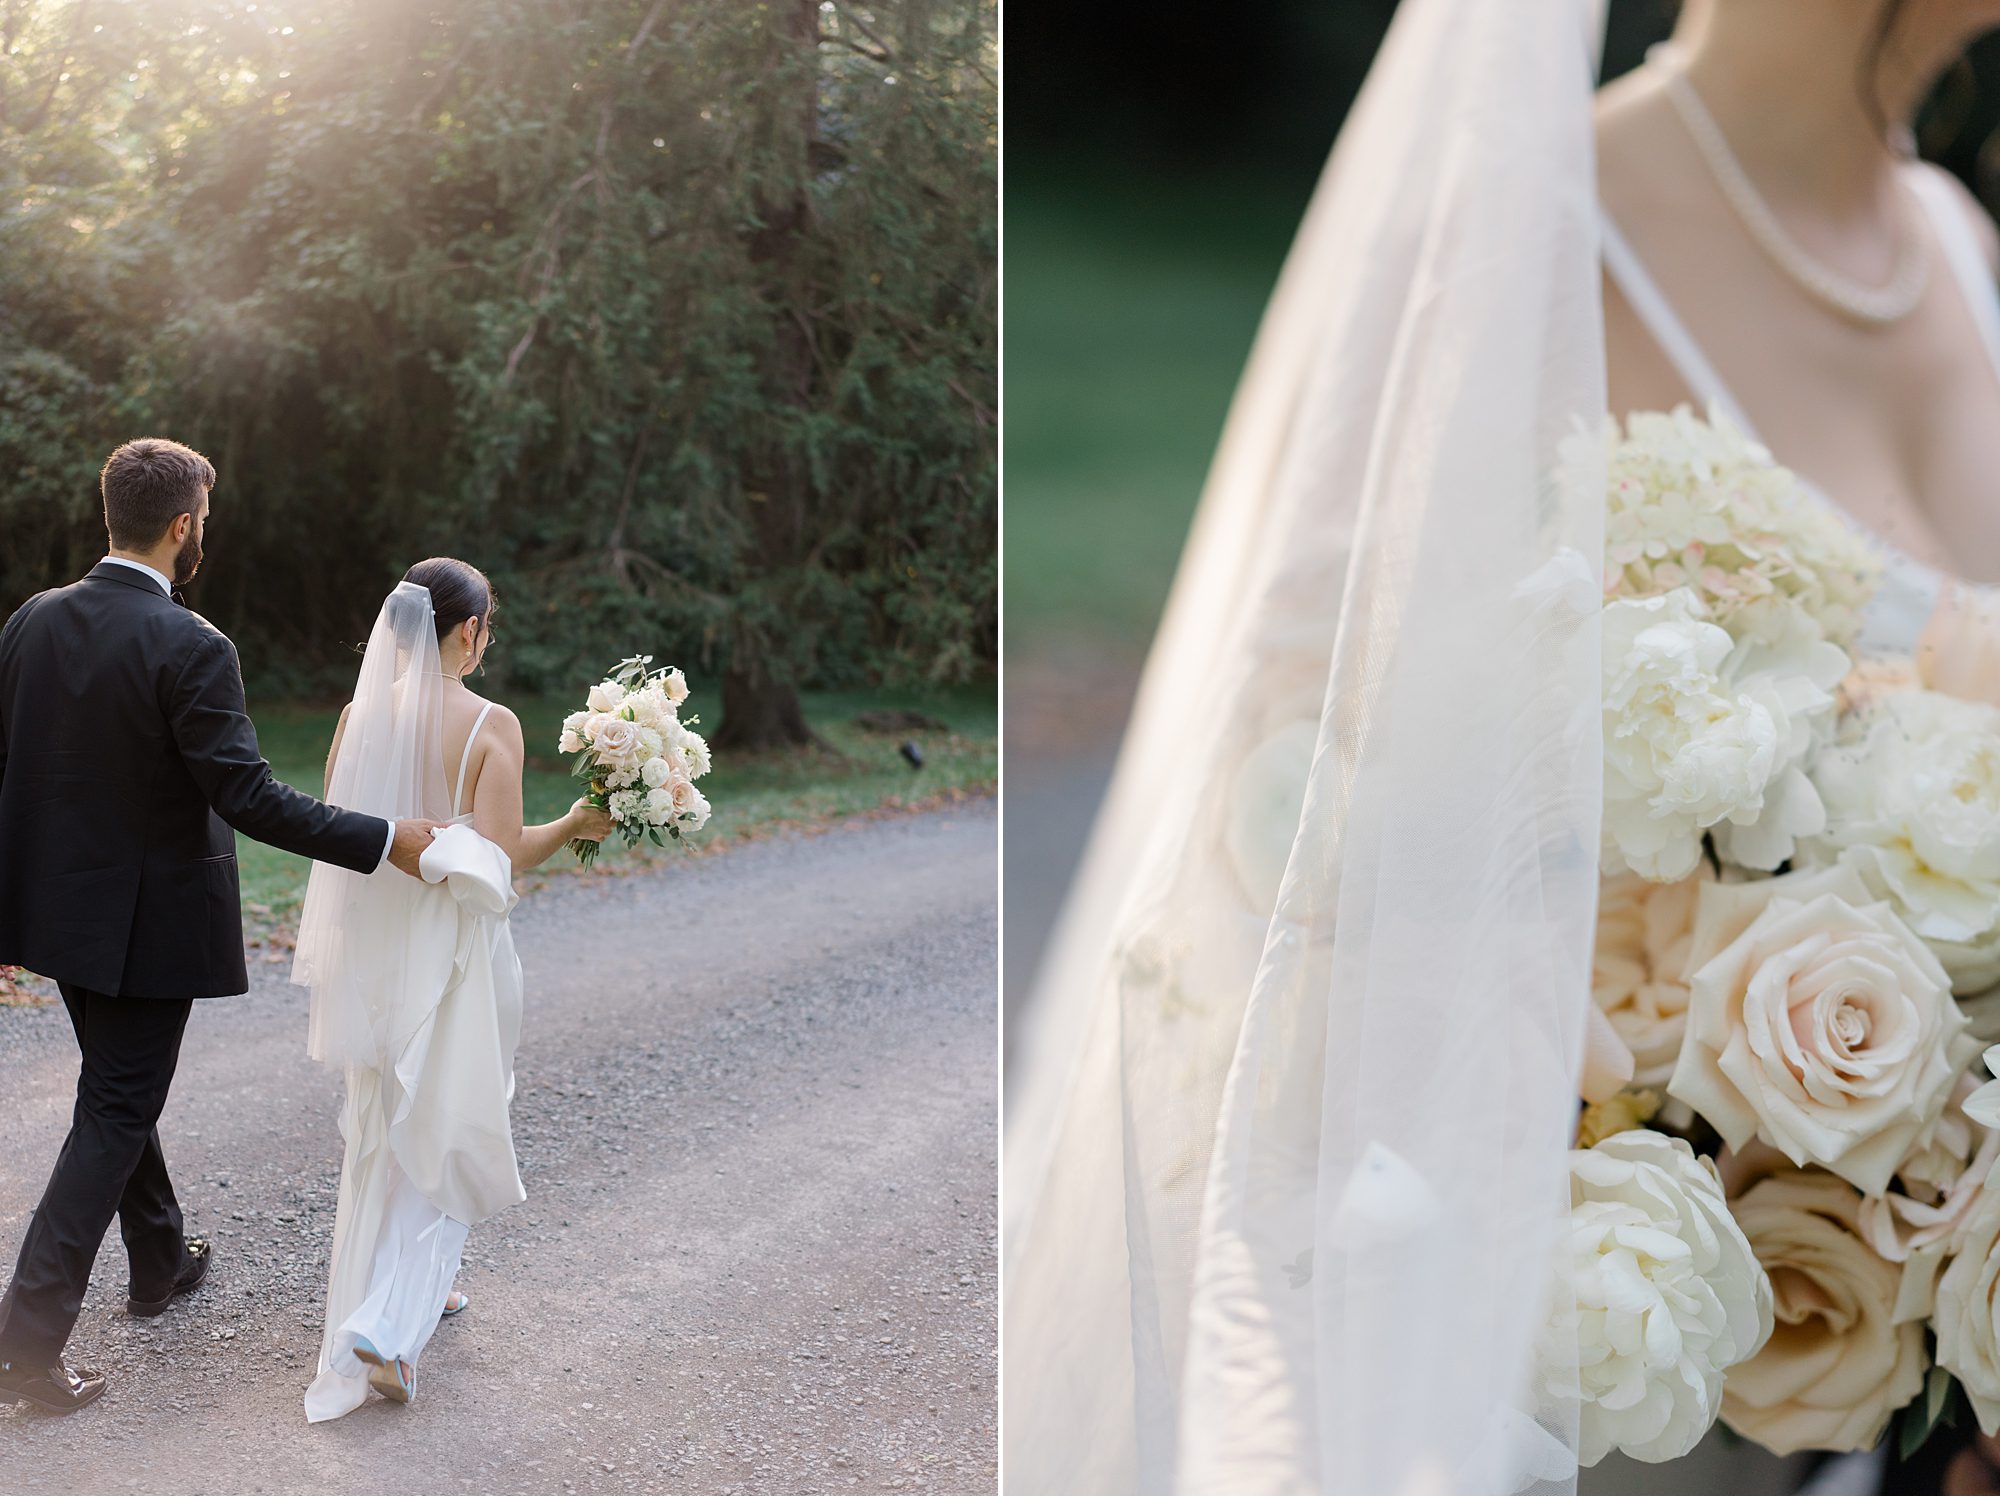 newlywed portraits from Romantic Floral-Centered Wedding 